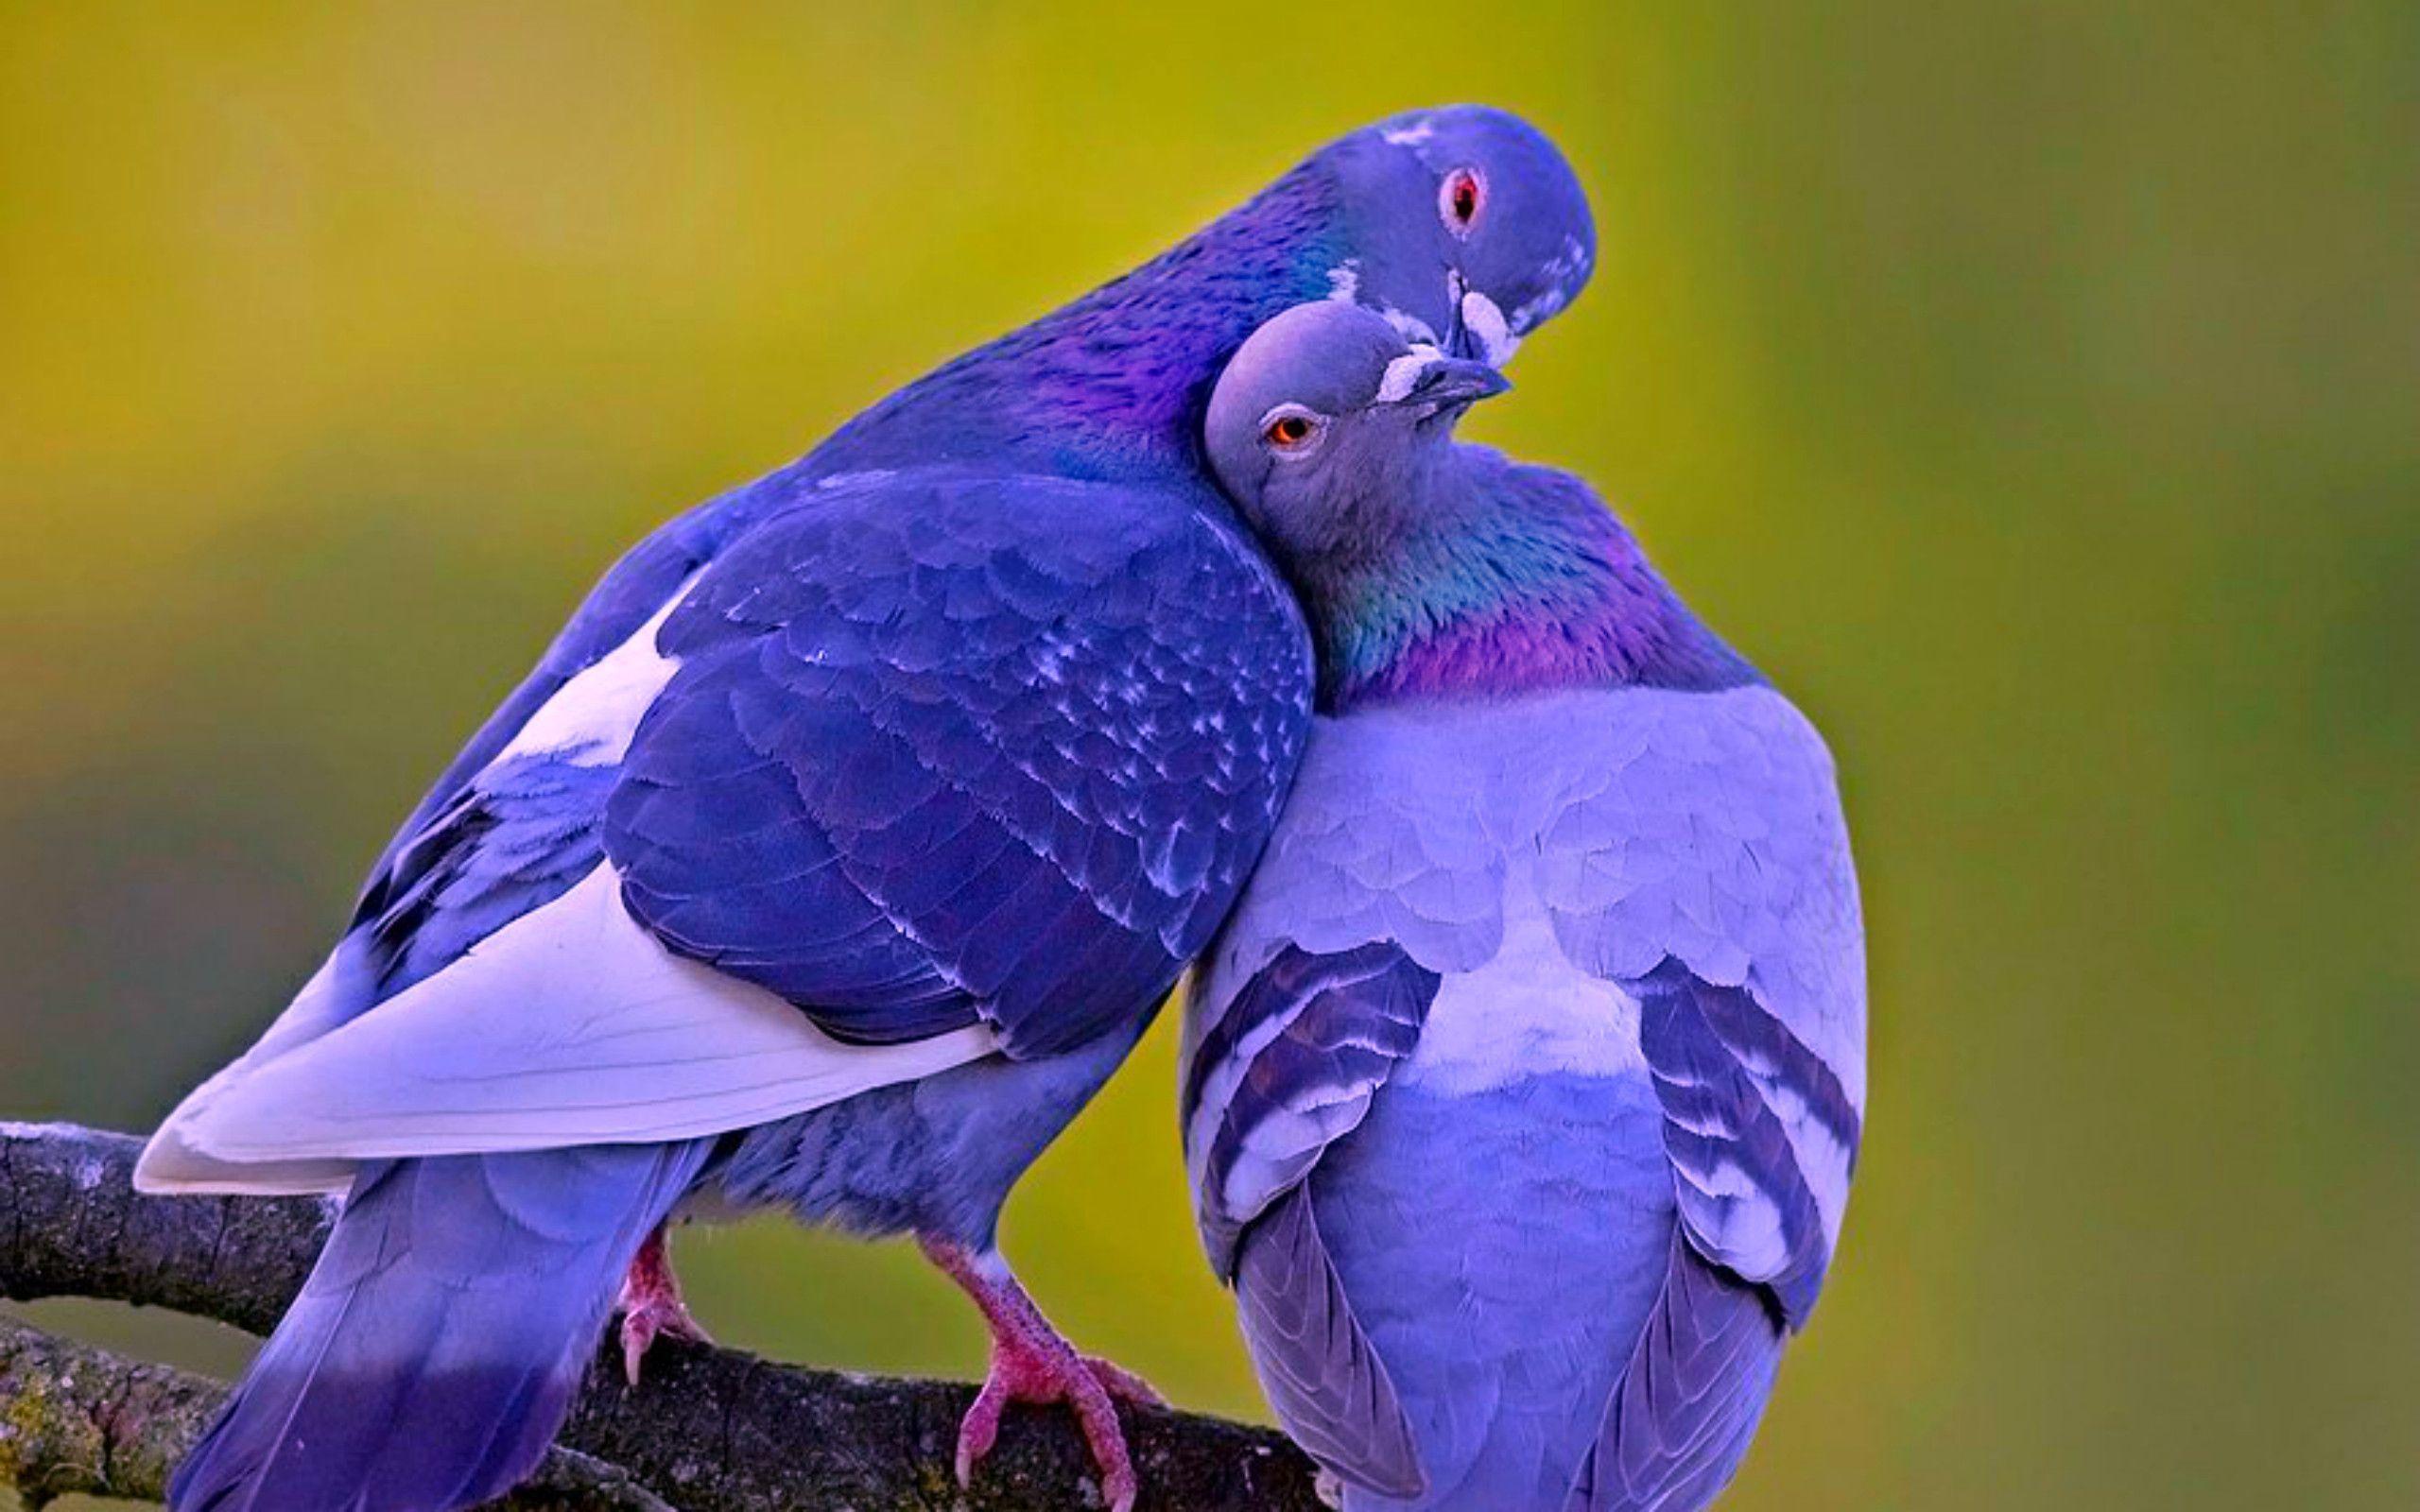 Image For > Love Birds Image Wallpapers